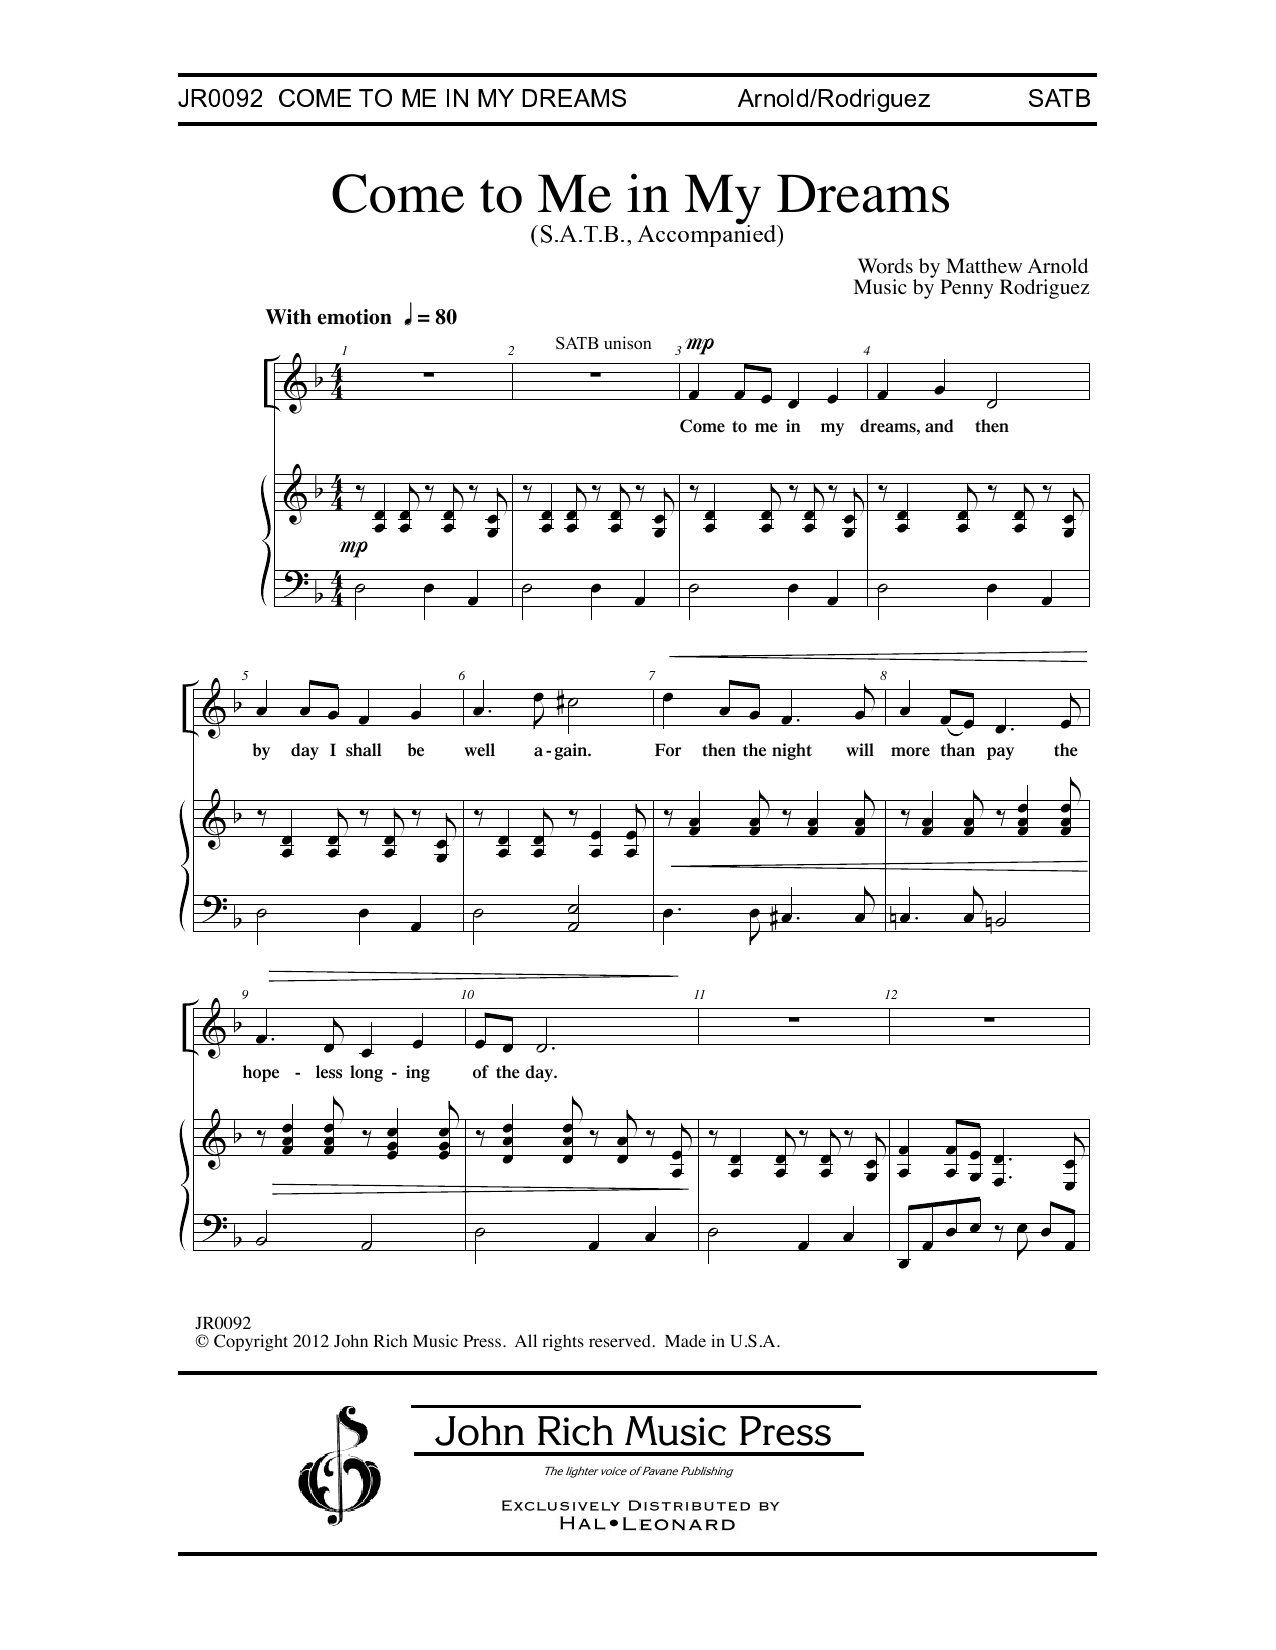 Download Penny Rodriguez Come to Me in My Dreams Sheet Music